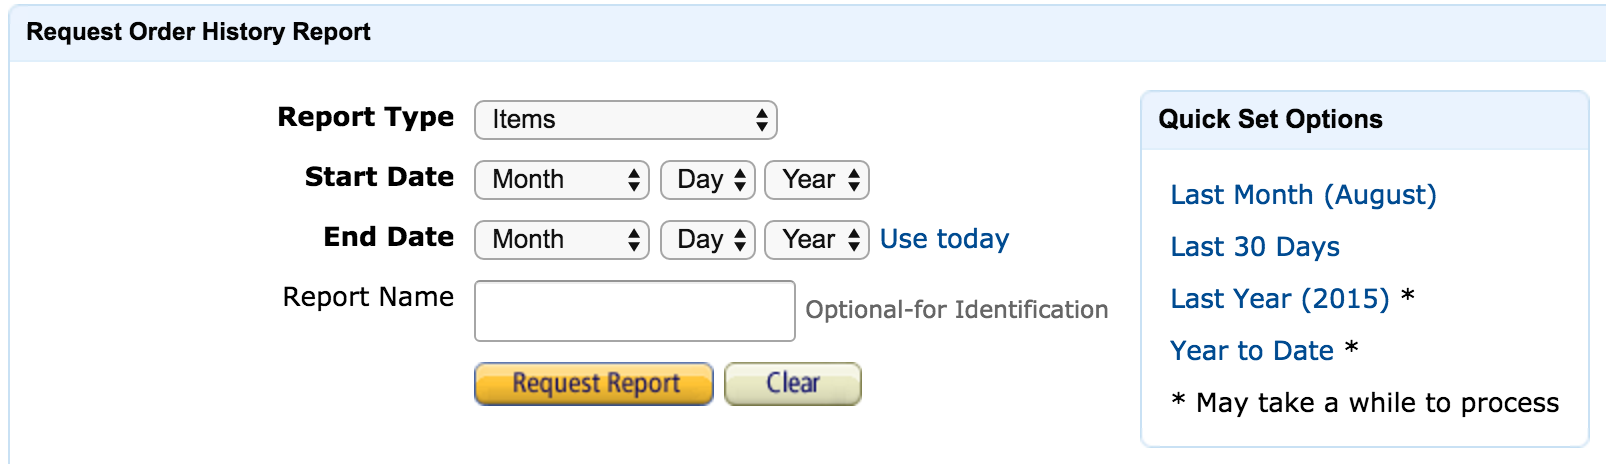 download order purchase history report amazon.com date range